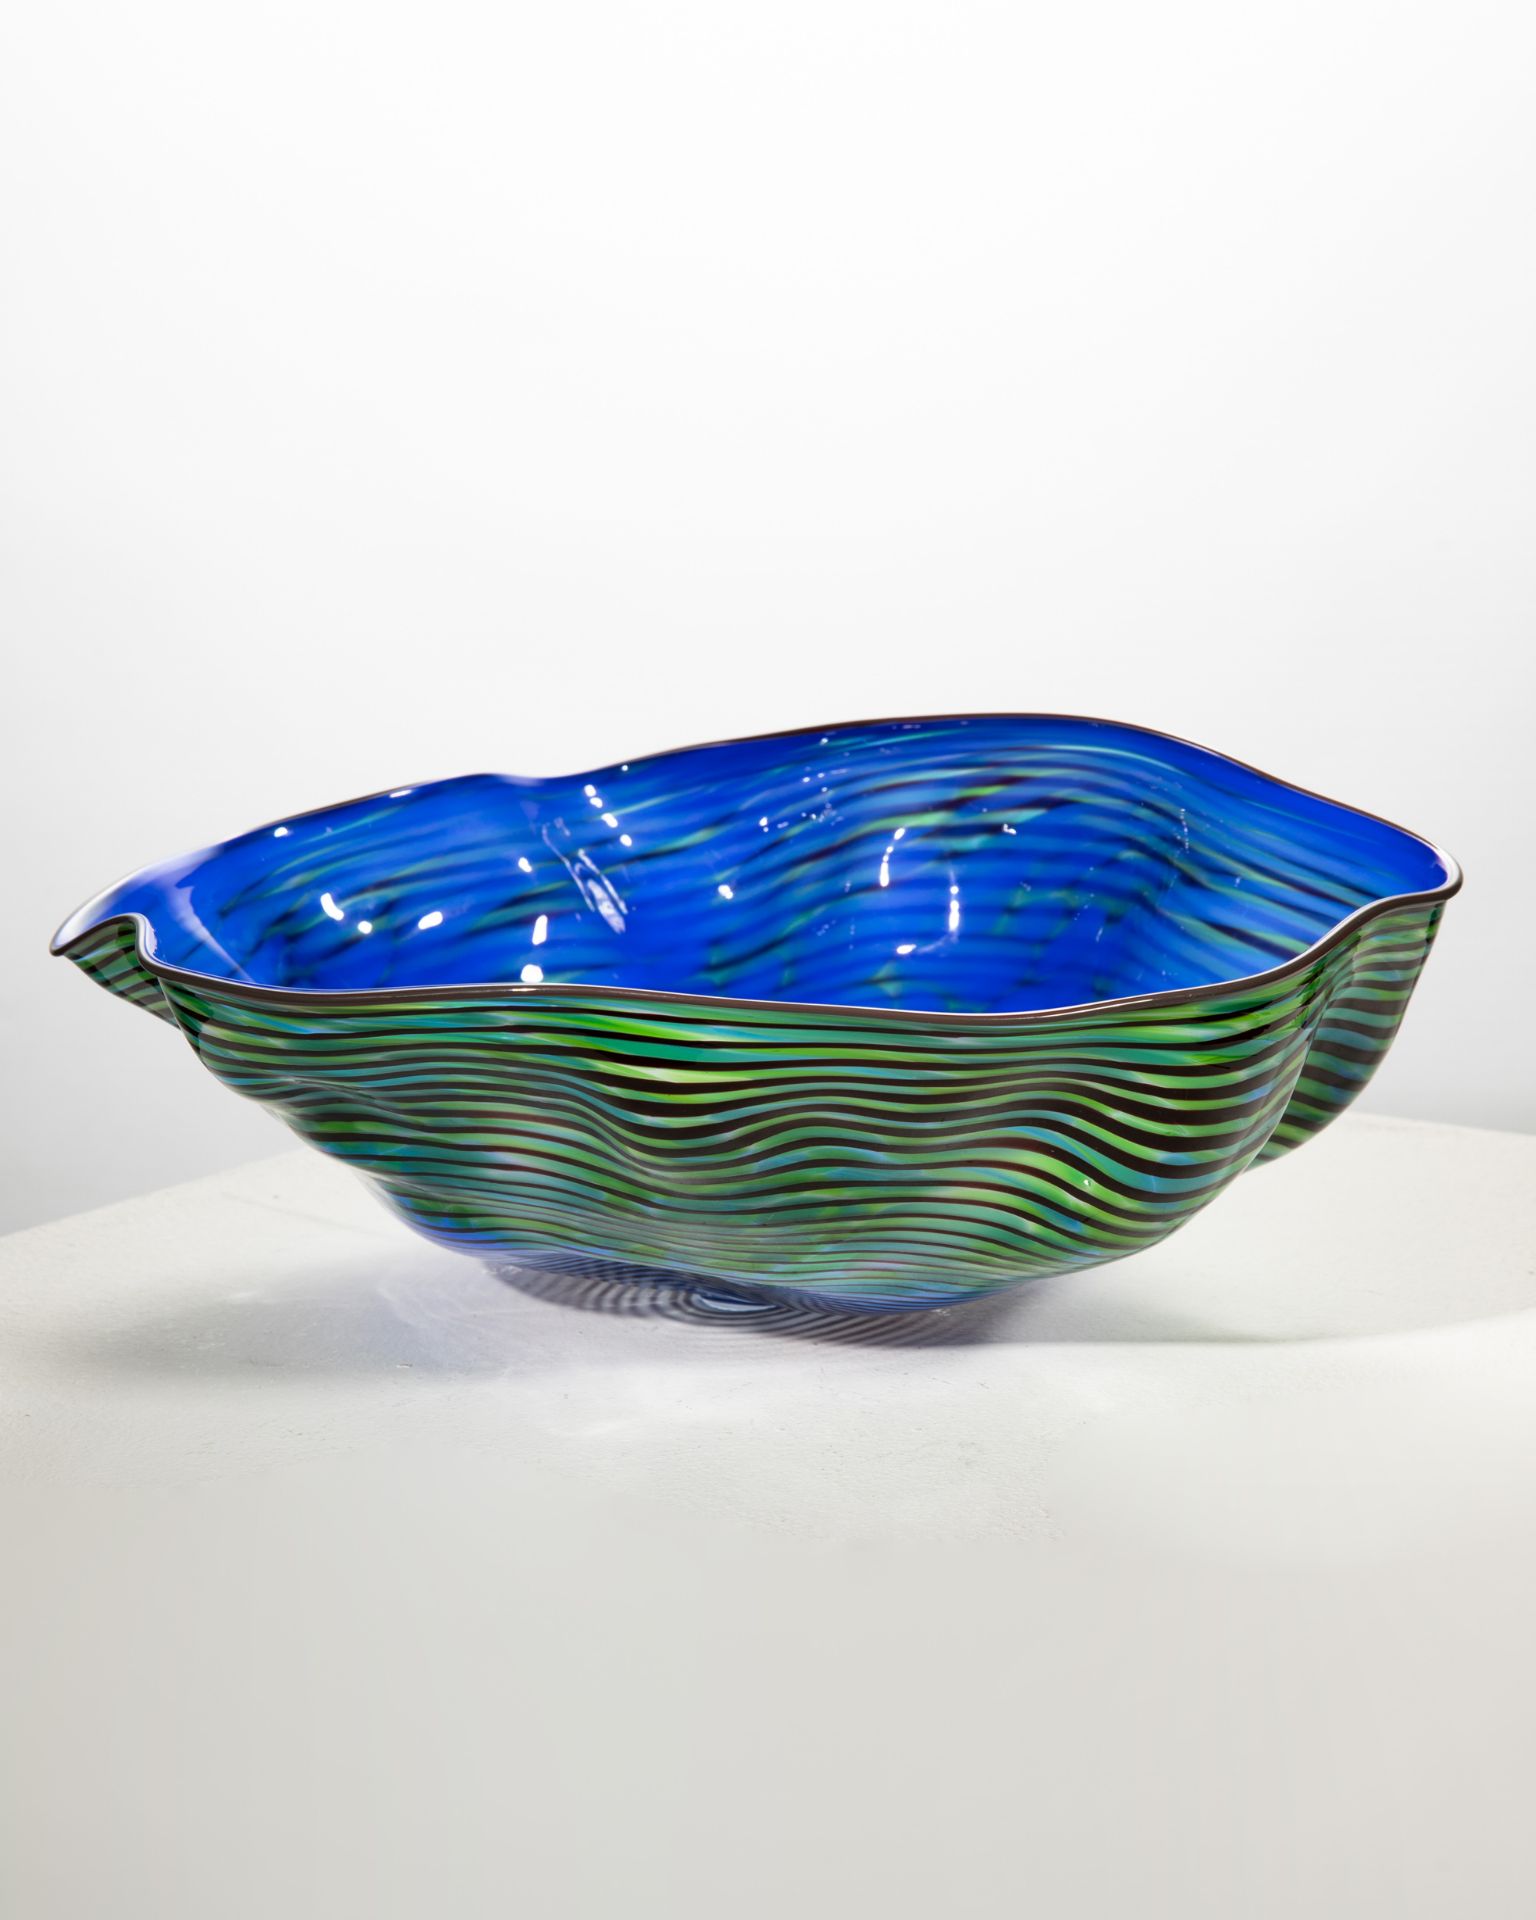 Dale Chihuly, 3 seaforms piece sculptural glasforms - Image 9 of 17